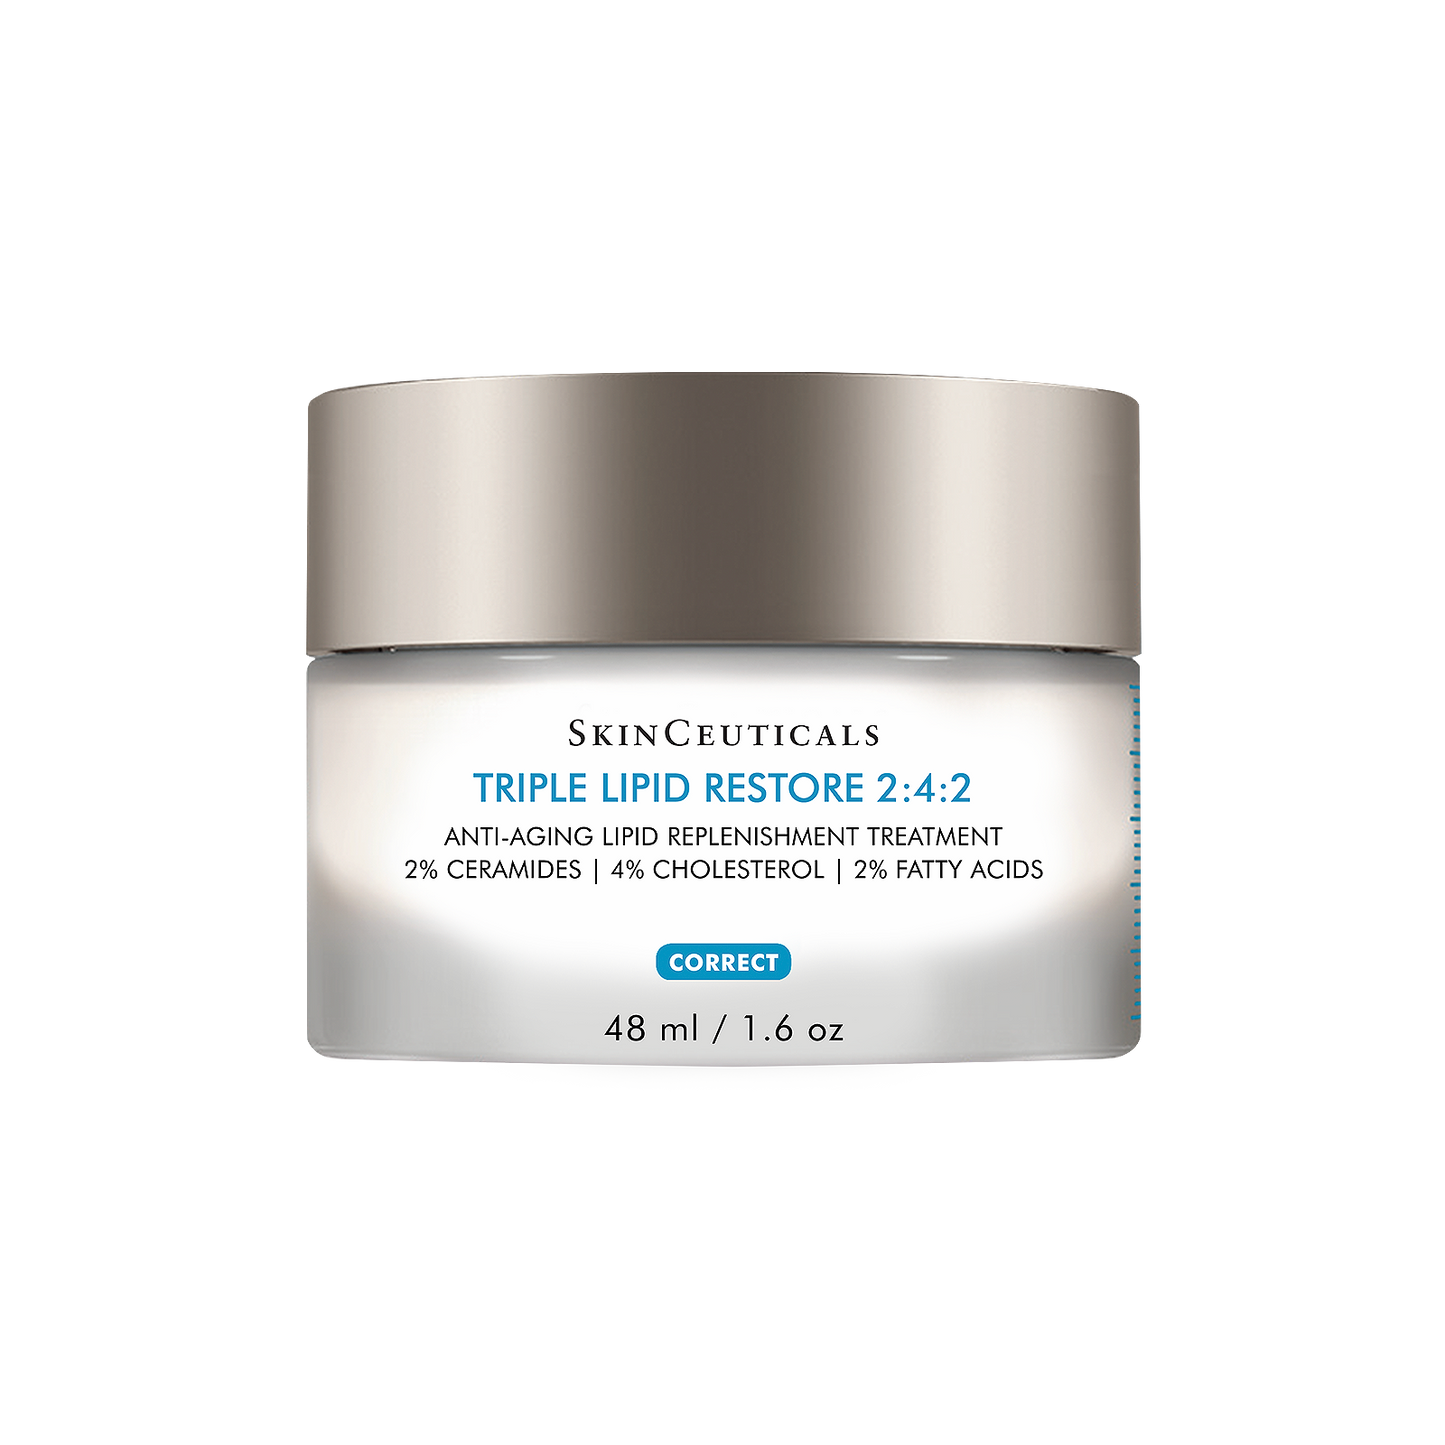 SkinCeuticals: First Signs of Aging Essentials